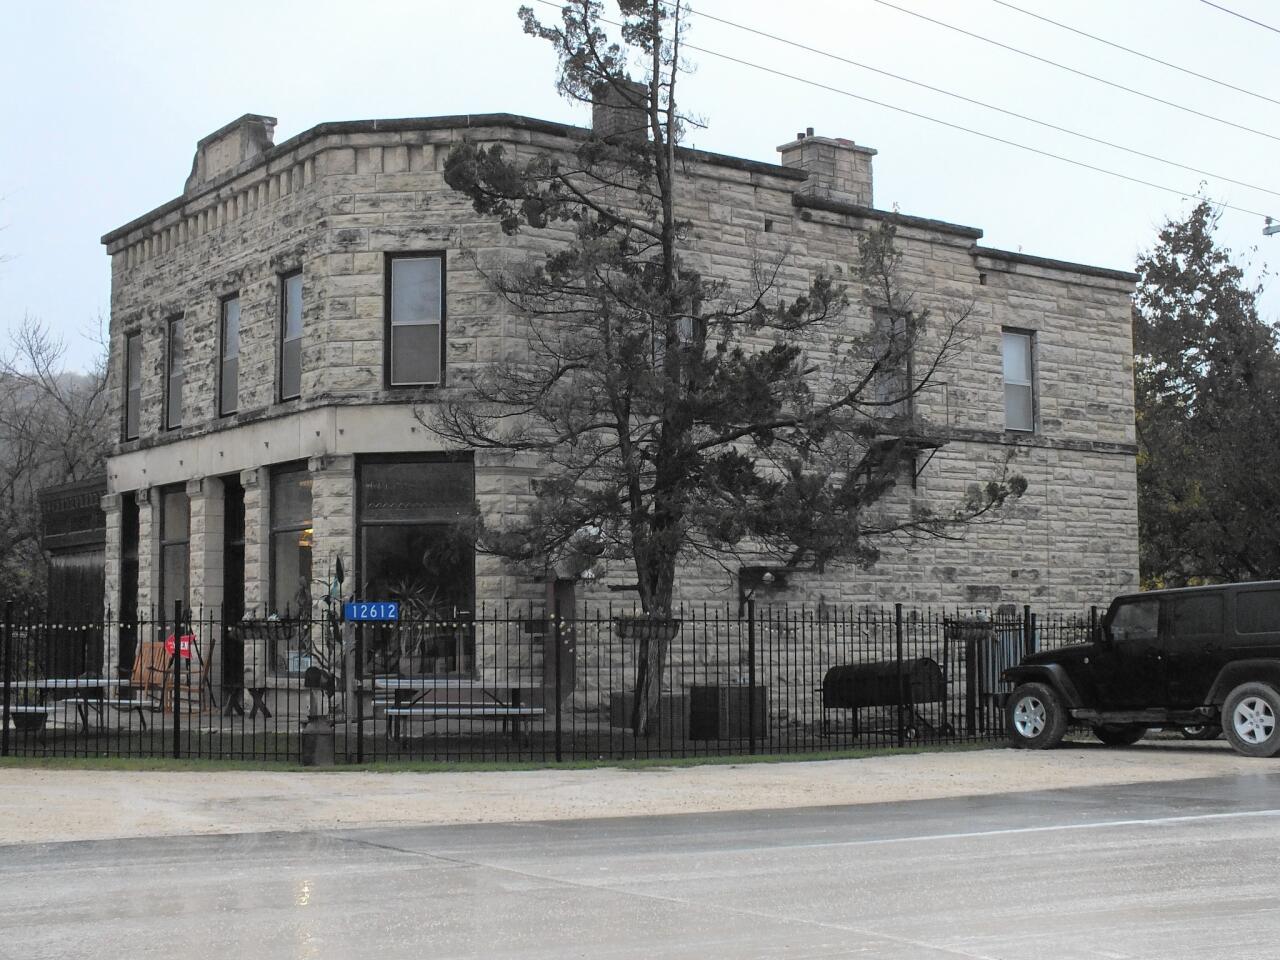 The former general store in tiny Stone City, Iowa, is now a popular bar-restaurant. The limestone building is depicted in a Grant Wood painting of the village.